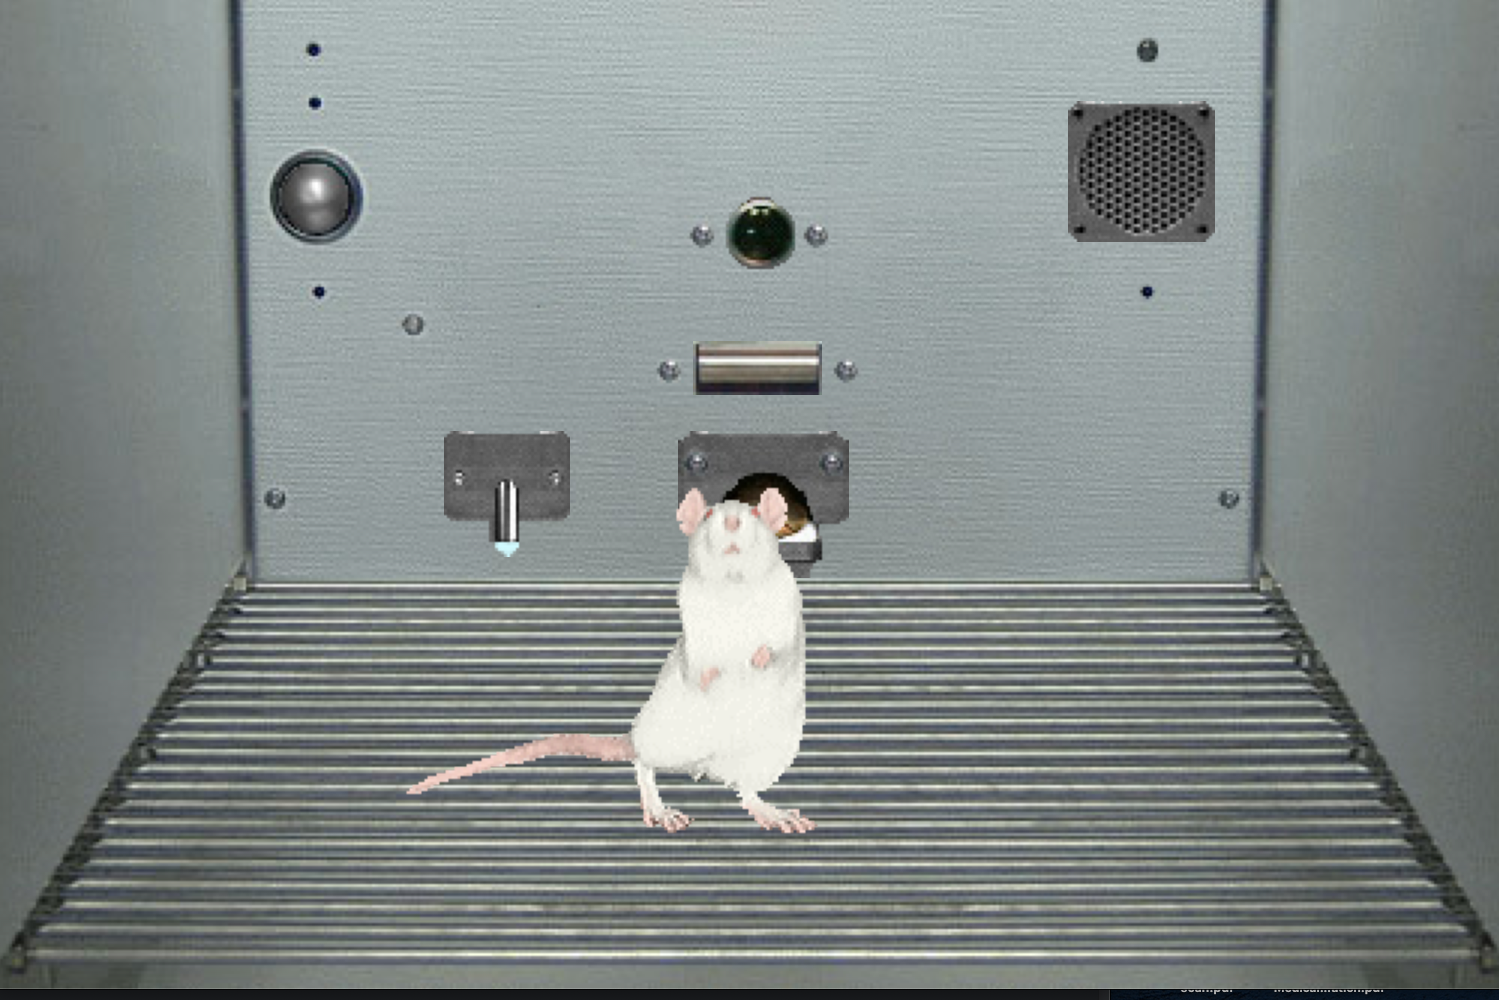 Sniffy the Virtual Rat Pro, Version 3.0 Edition 3 by Tom